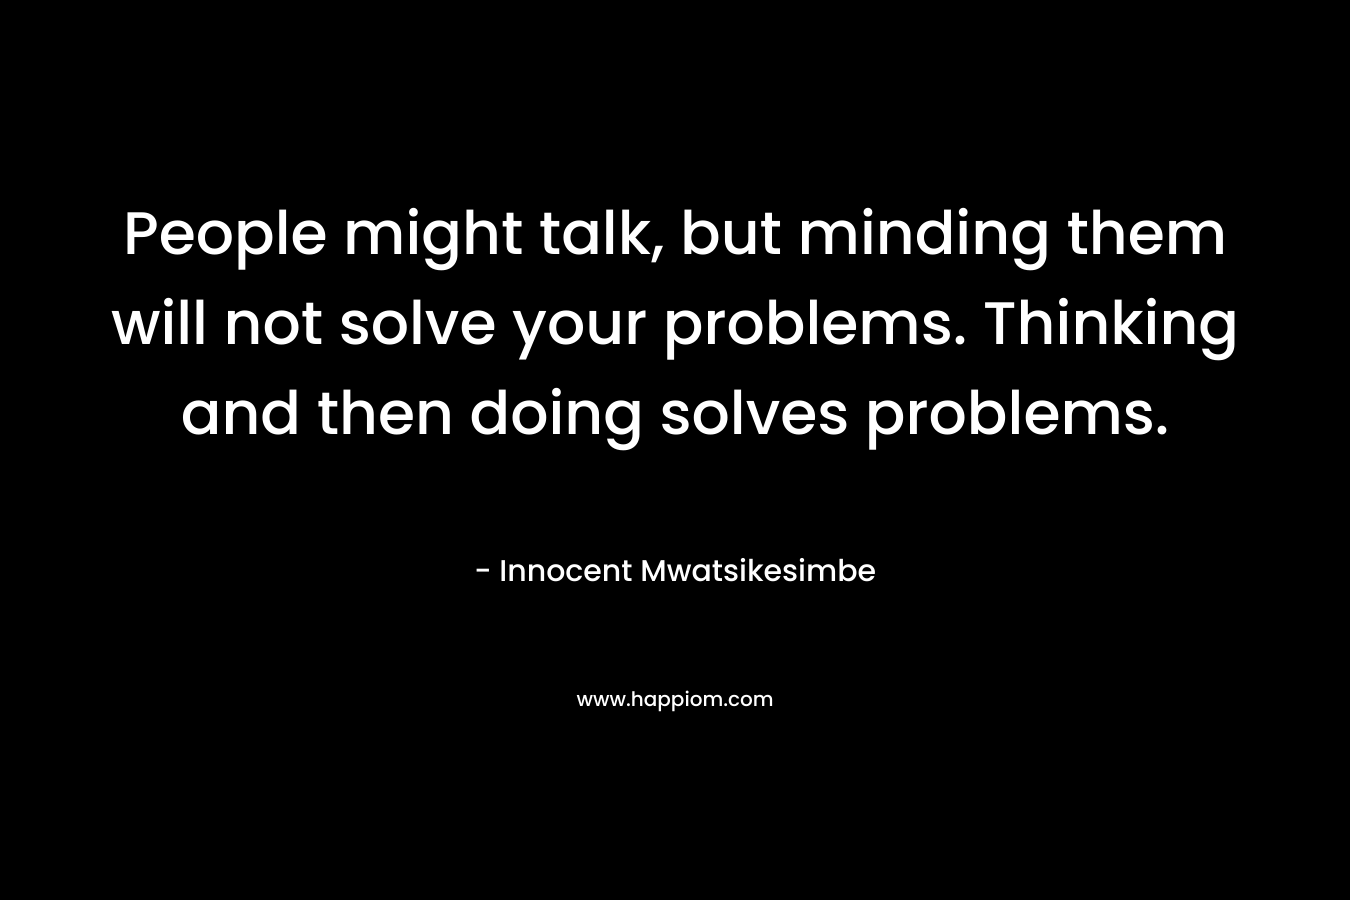 People might talk, but minding them will not solve your problems. Thinking and then doing solves problems.